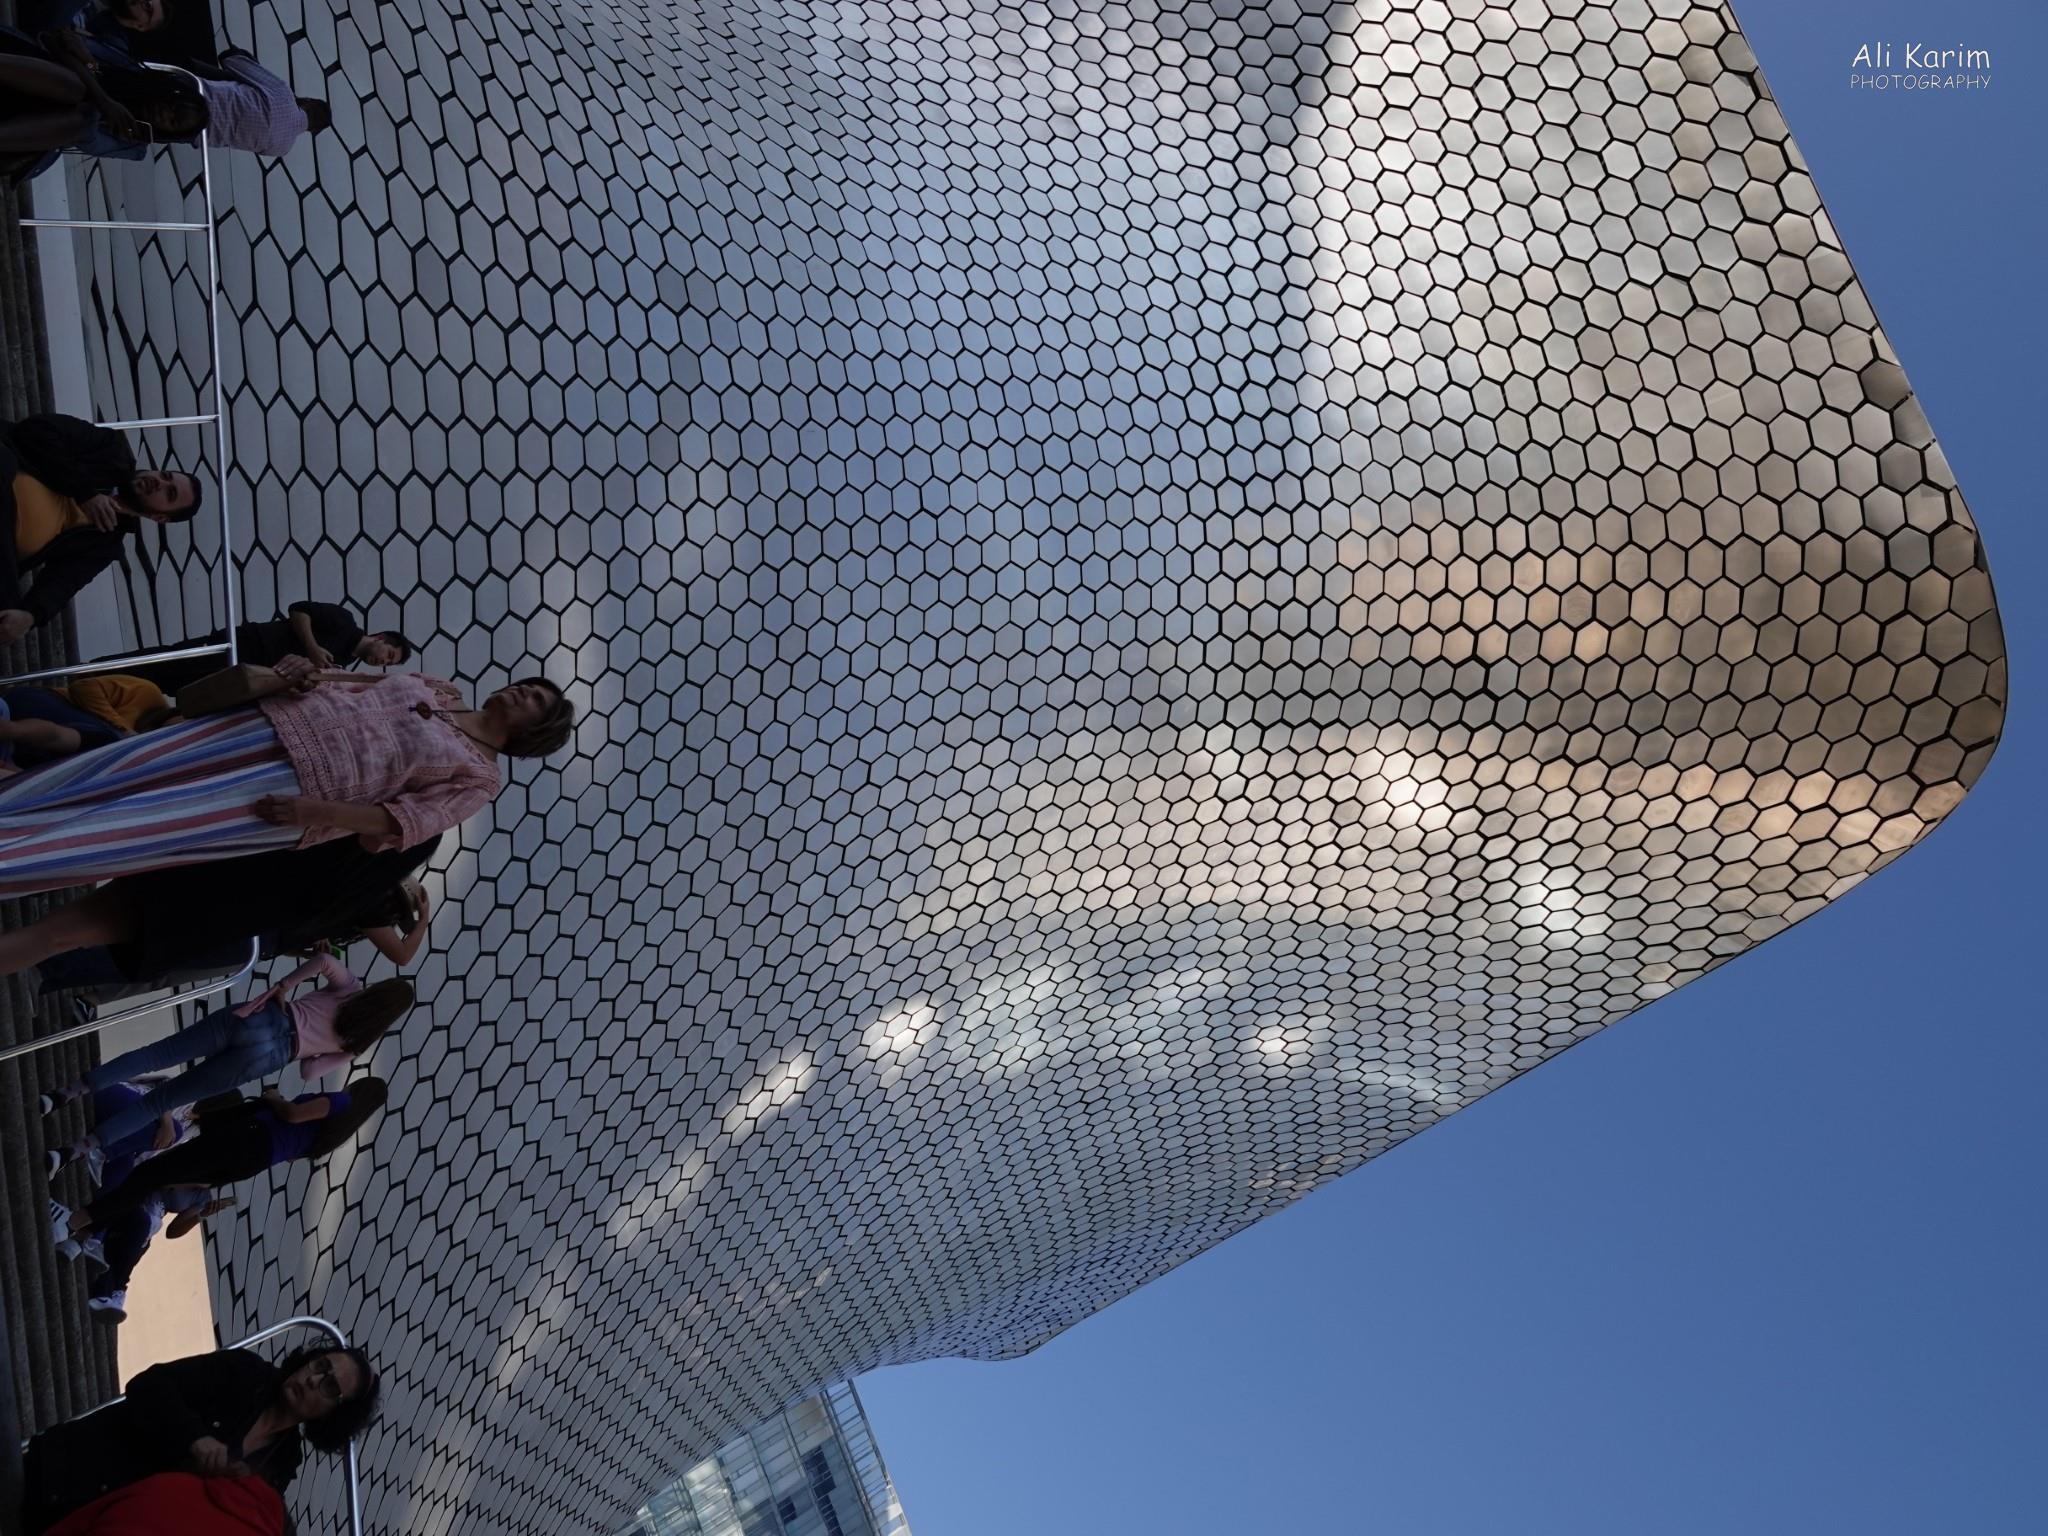 Mexico City, Mexico, Dec 2019, Image to get an idea of the size of the Soumaya Museum building